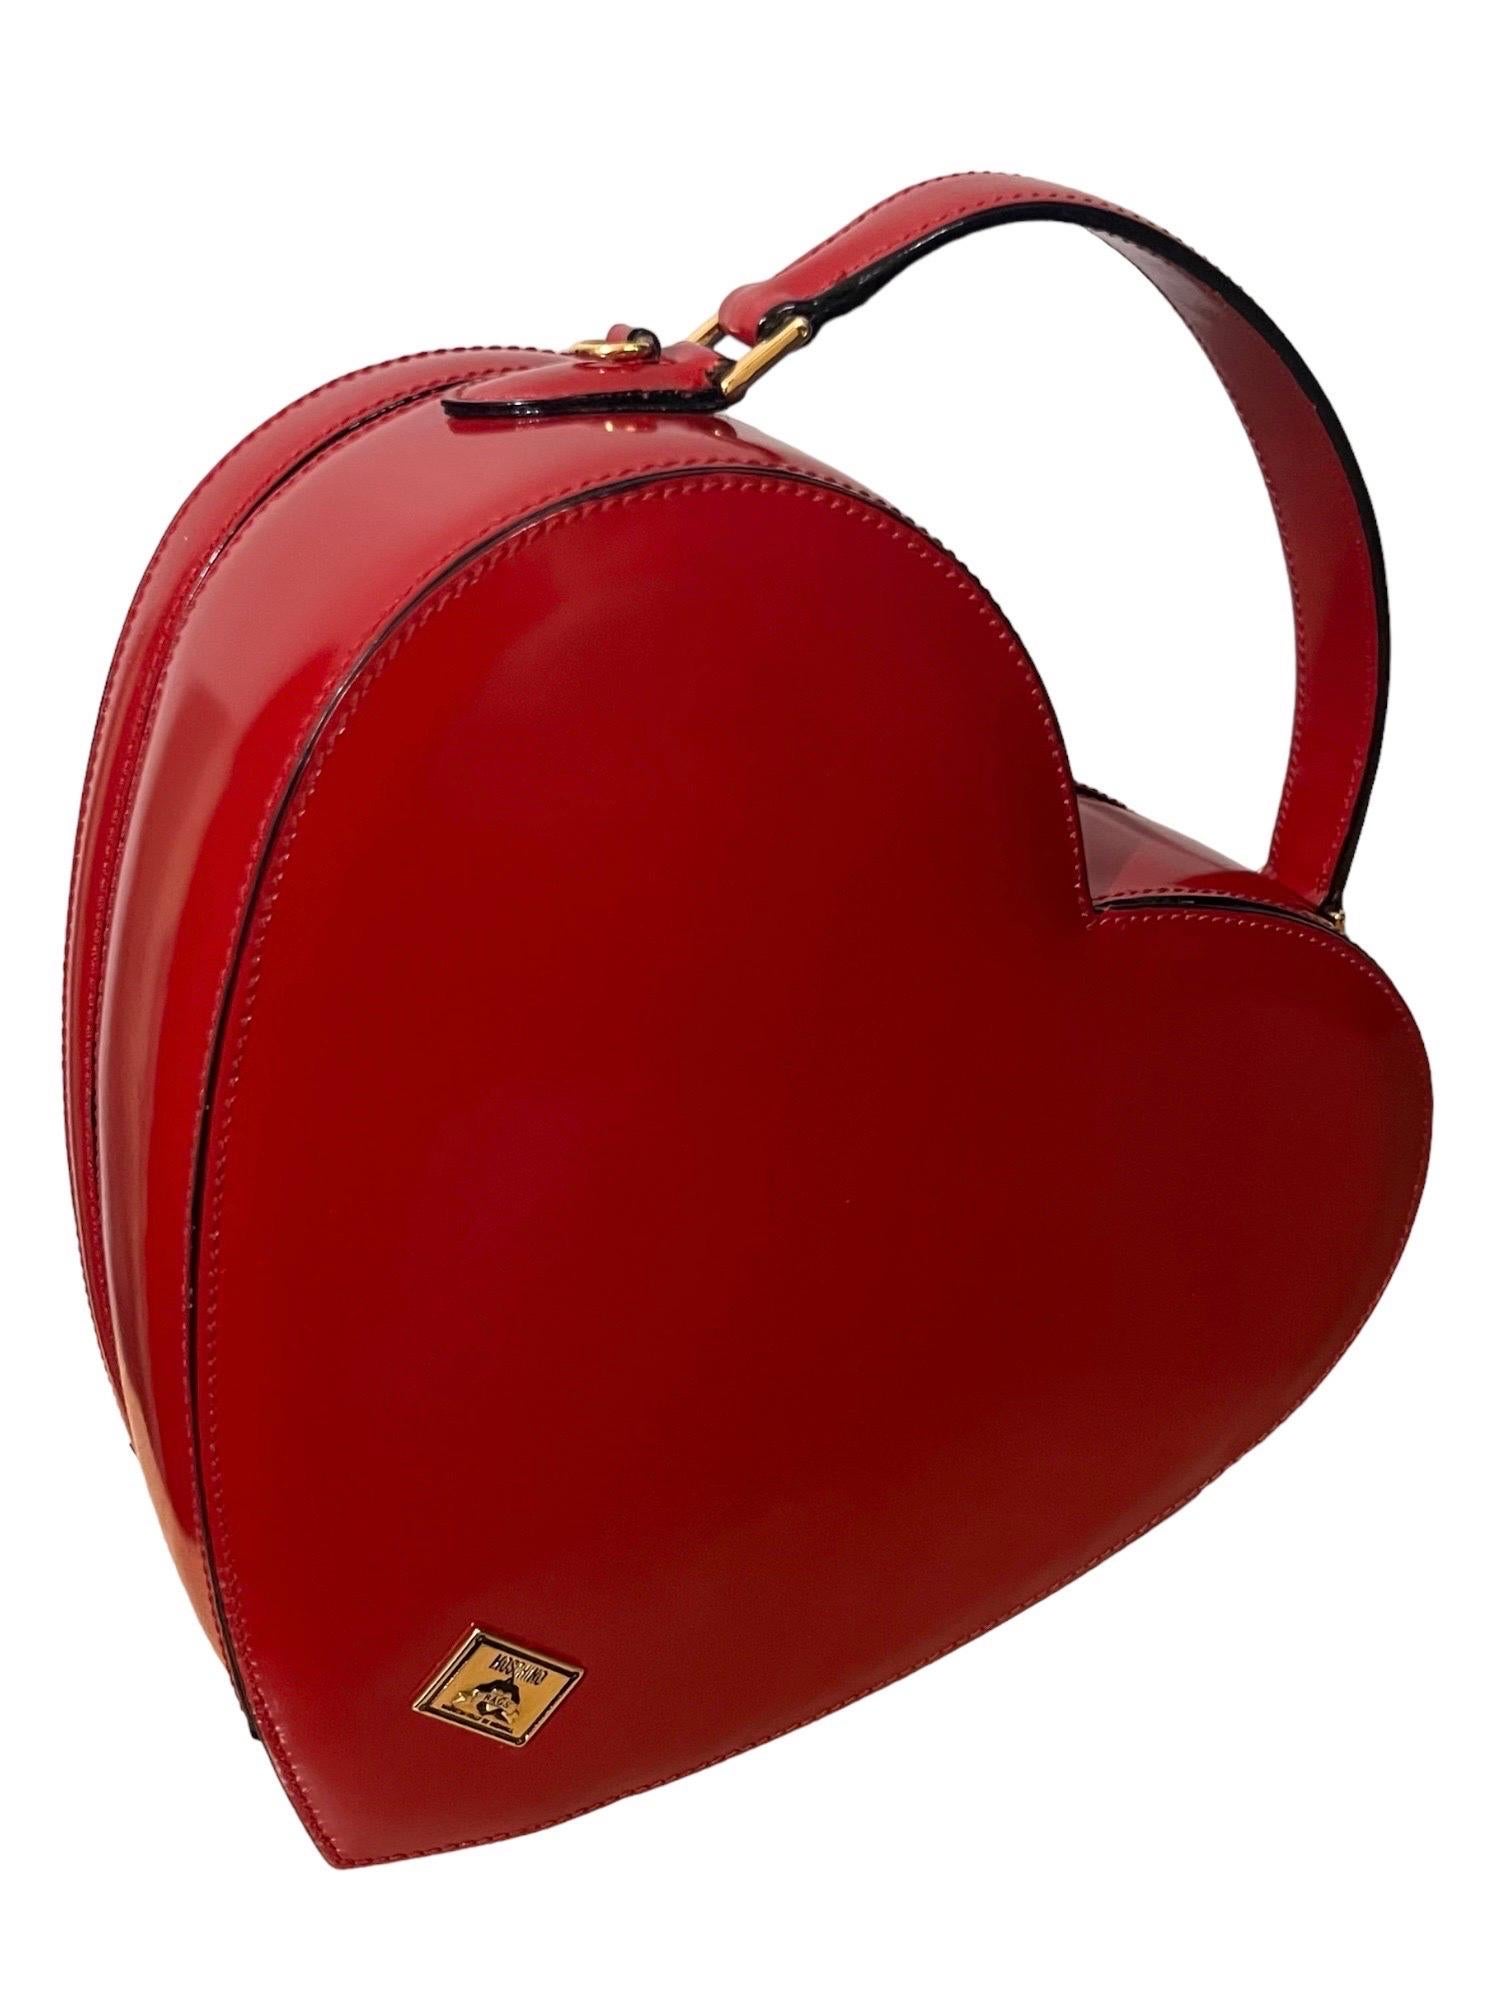 Moschino Vintage Red Leather Heart Bag The Nanny 3